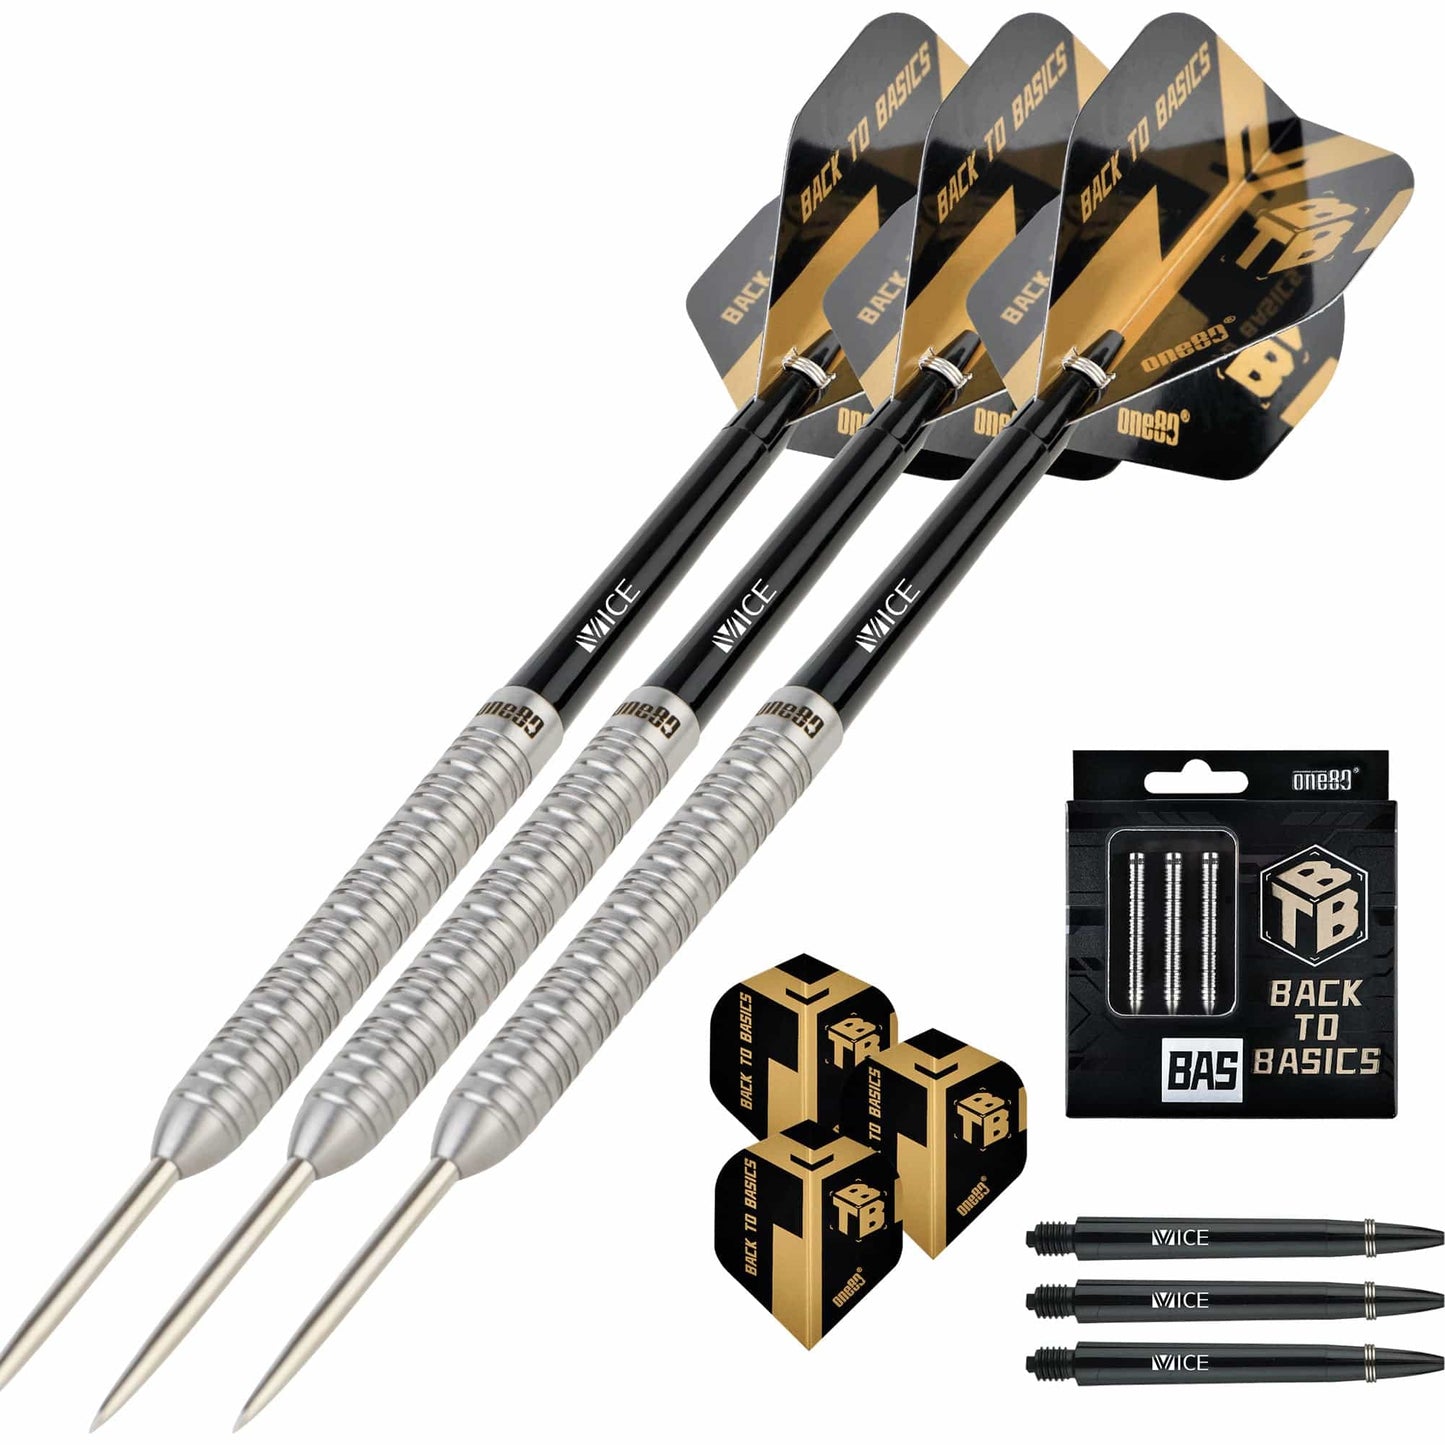 One80 Back To Basic Darts - Steel Tip - BAS - Natural - Ringed